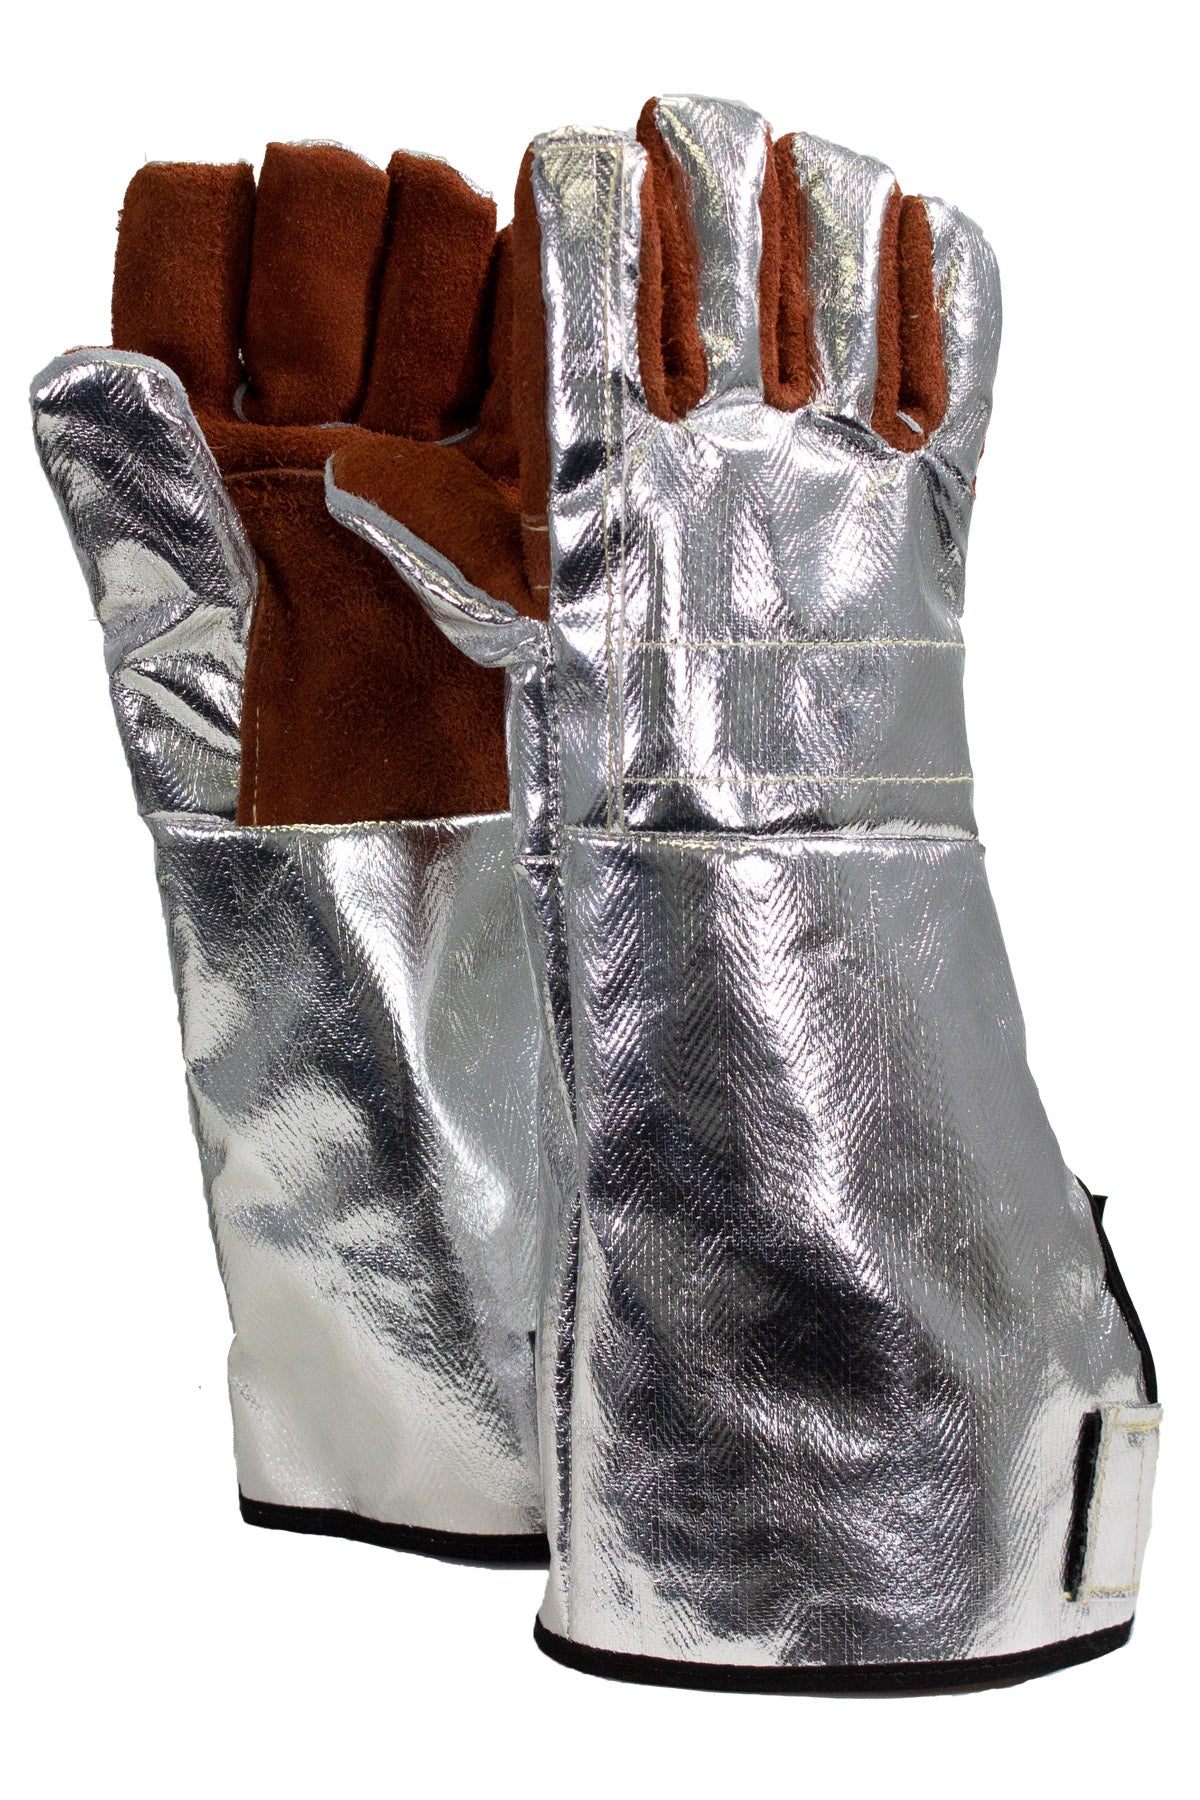 National Safety Apparel Thermal Leather Glove, Hook and Loop Adjustment